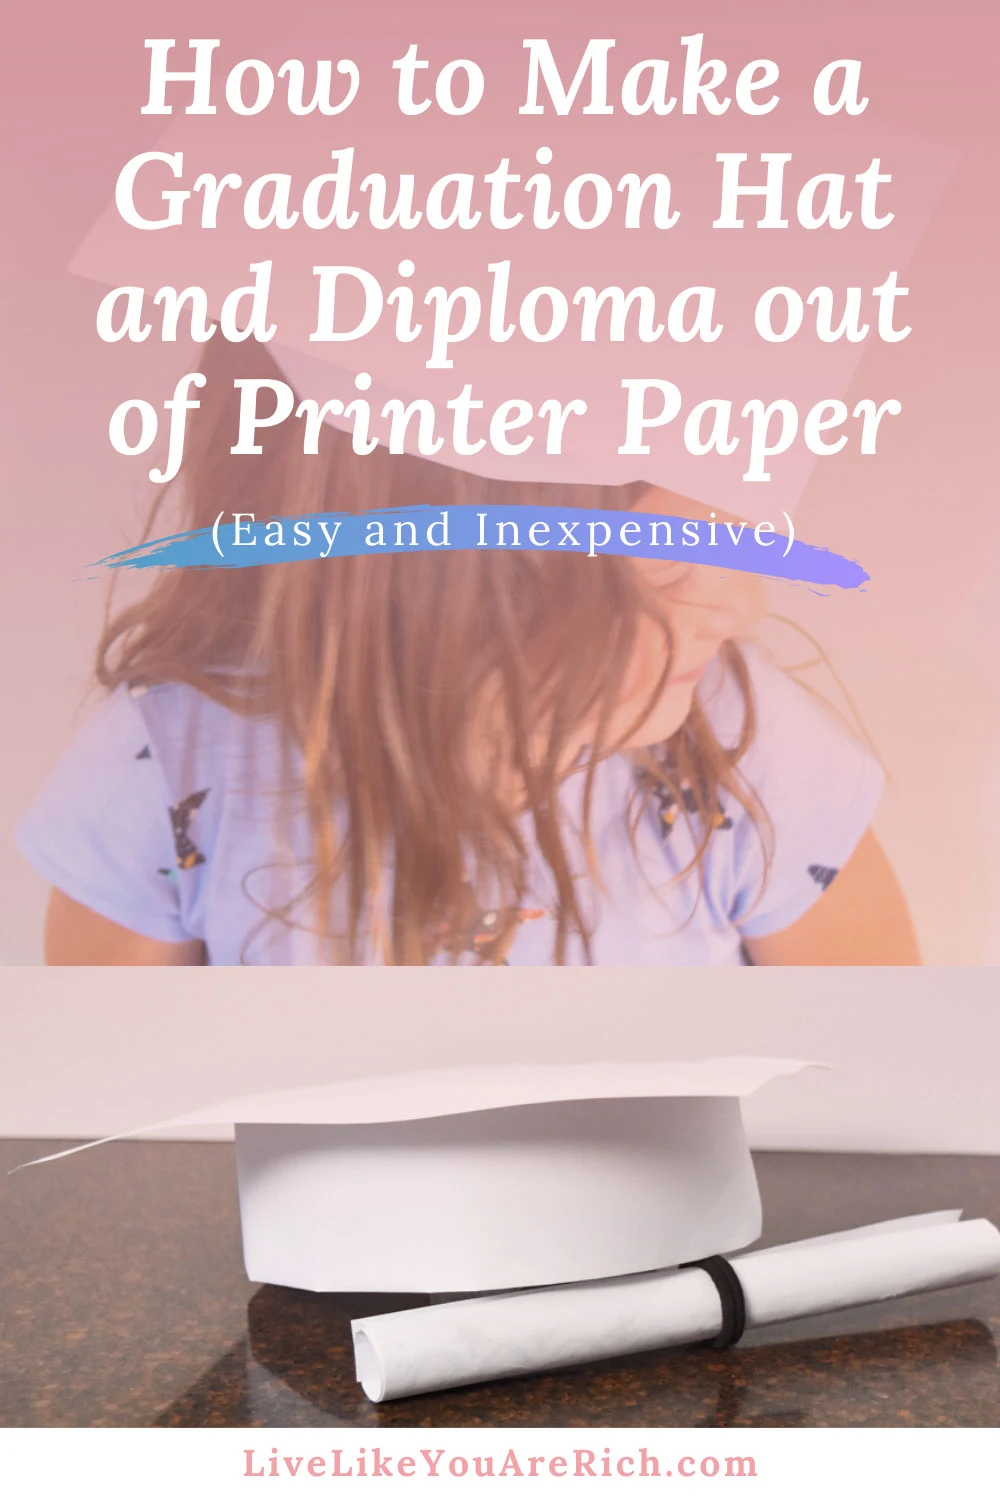 This tutorial will show you how to make a graduation hat and diploma out of printer paper and tape. It is very easy and inexpensive. It’s a great craft for kids. These caps are customizable. #crafts #kidsactivities #graduationhat